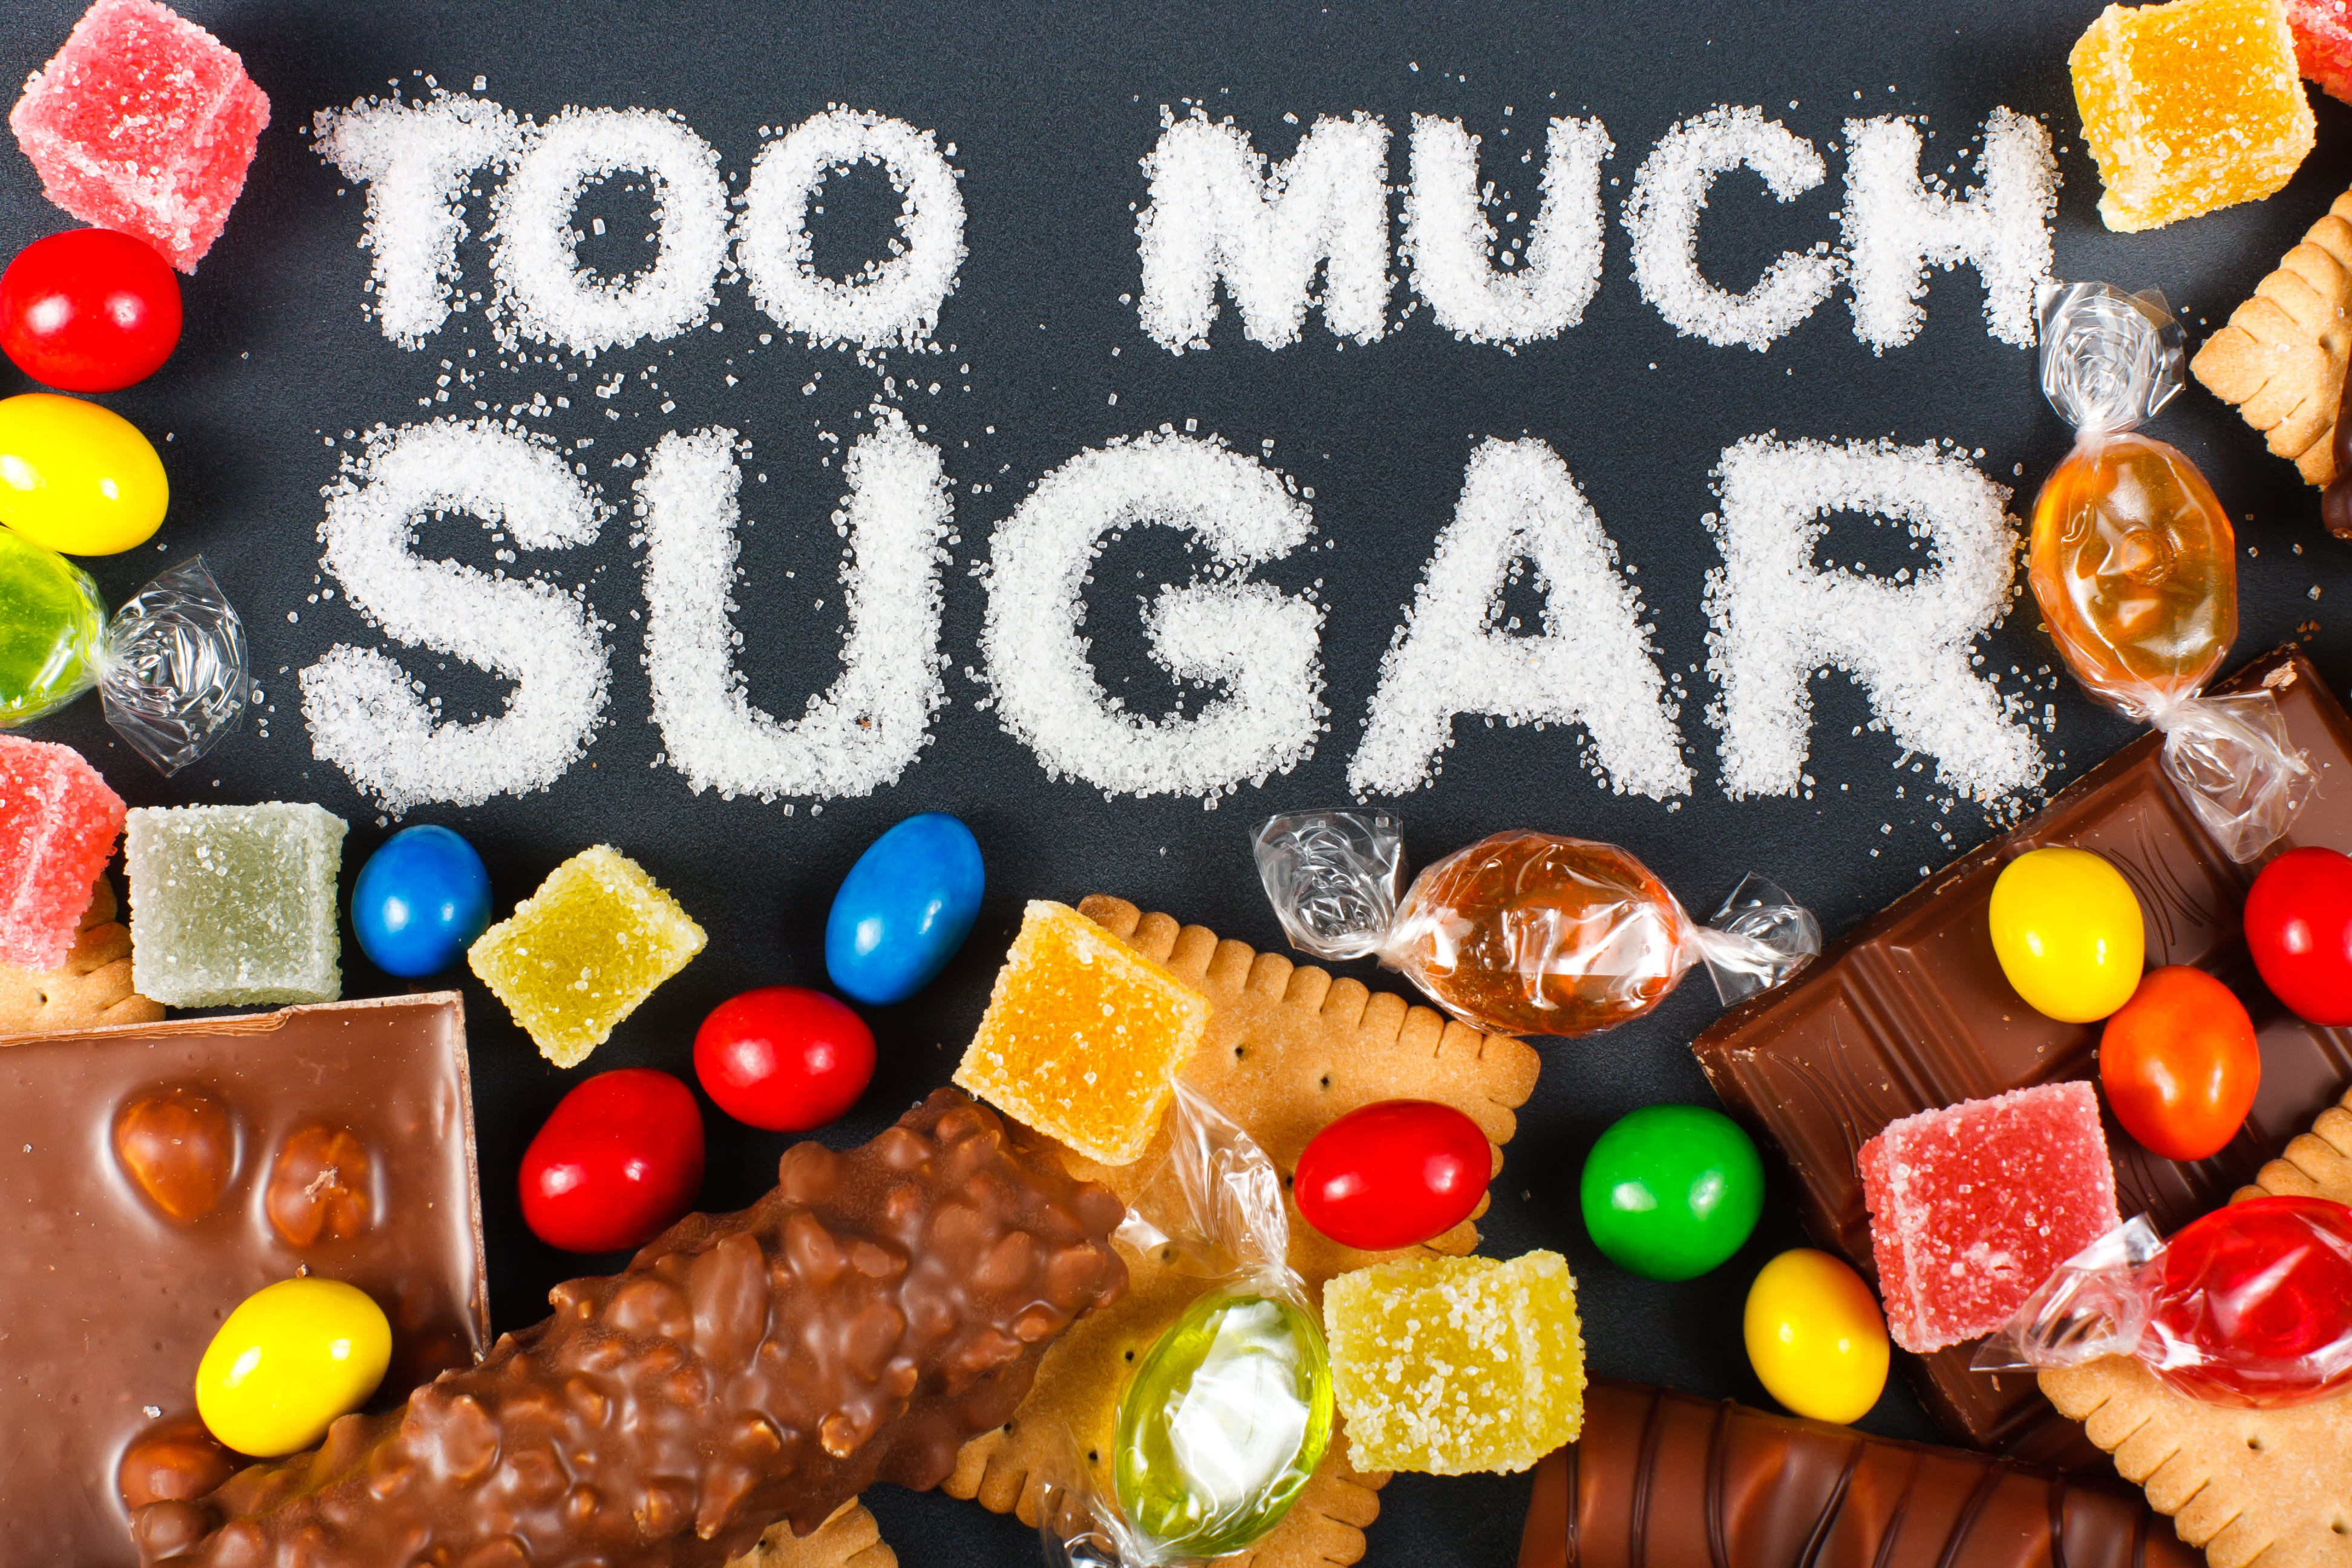 Sweet Poison: Why Sugar is Ruining Your Health (2022) So How Much Sugar Is Too Much Sugar?